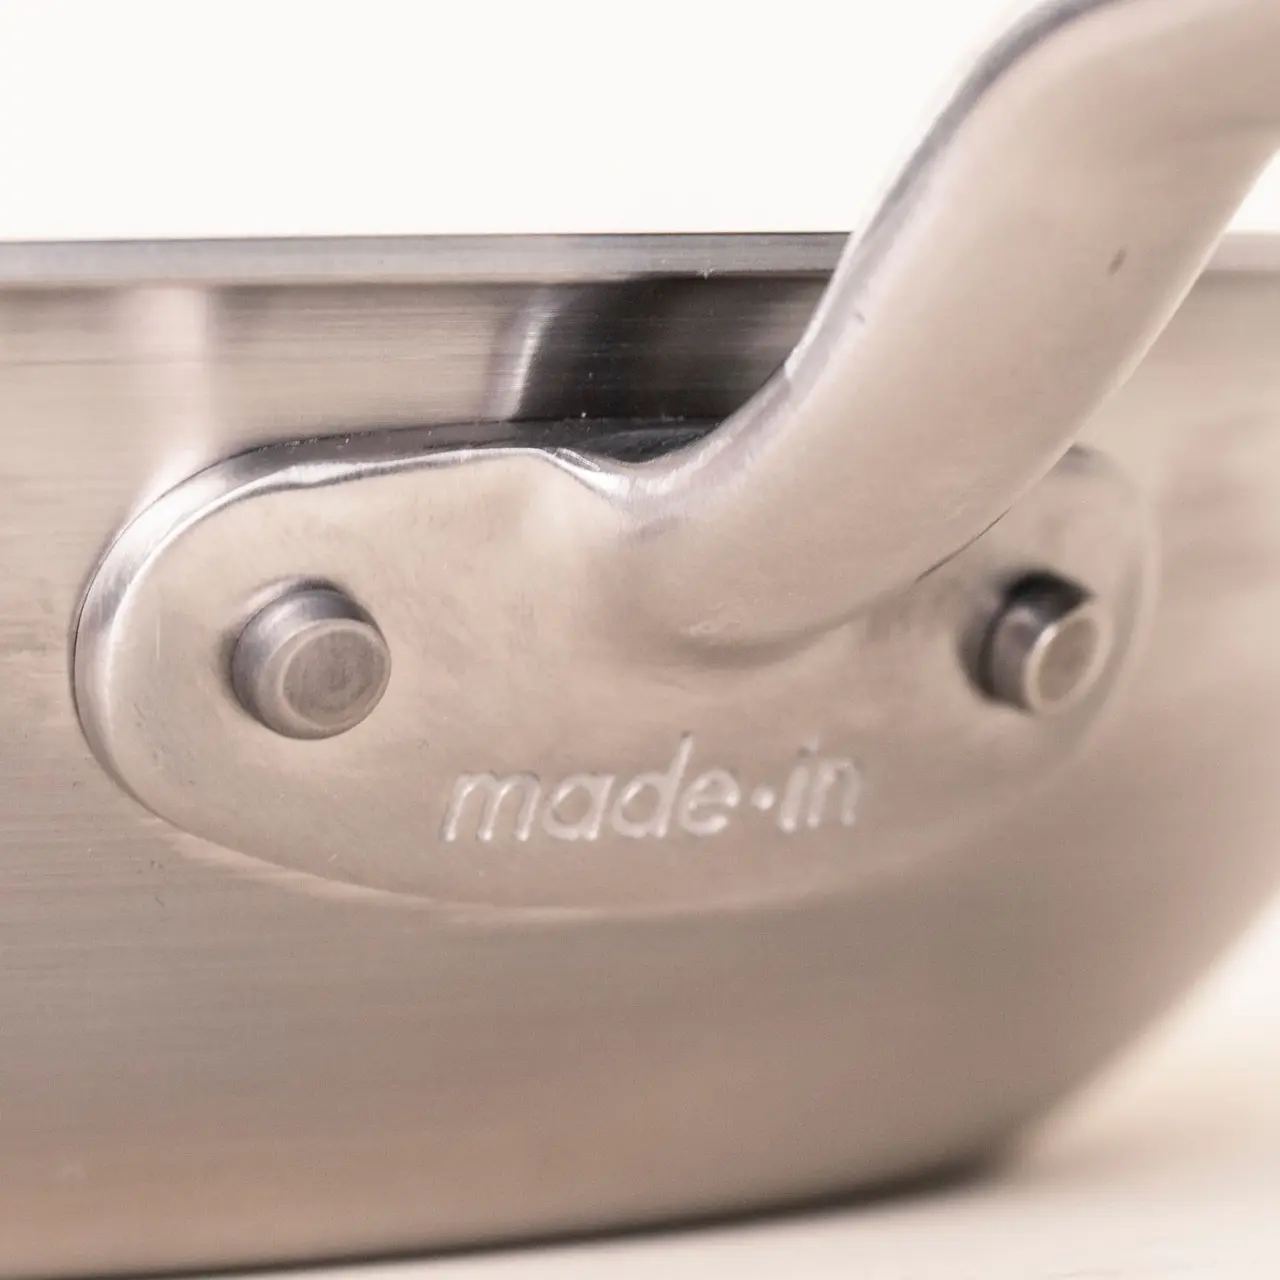 A close-up shows a stainless steel pan's handle riveted to the body with "made.in" engraved on the surface.